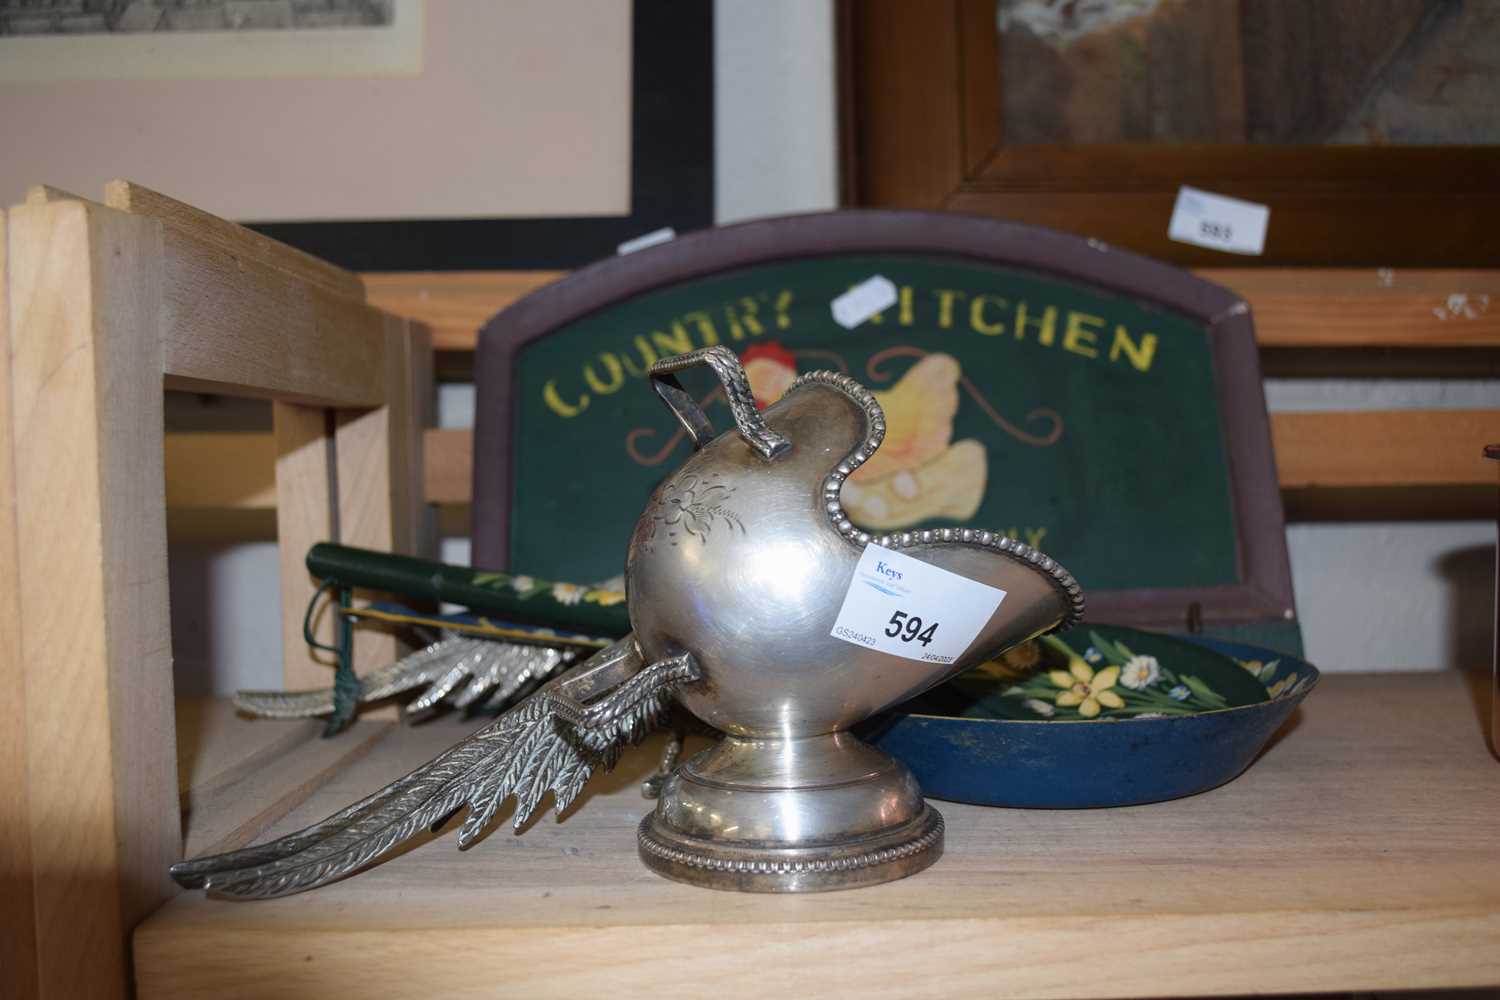 Pair of white metal table pheasants together with a country kitchen key rack etc